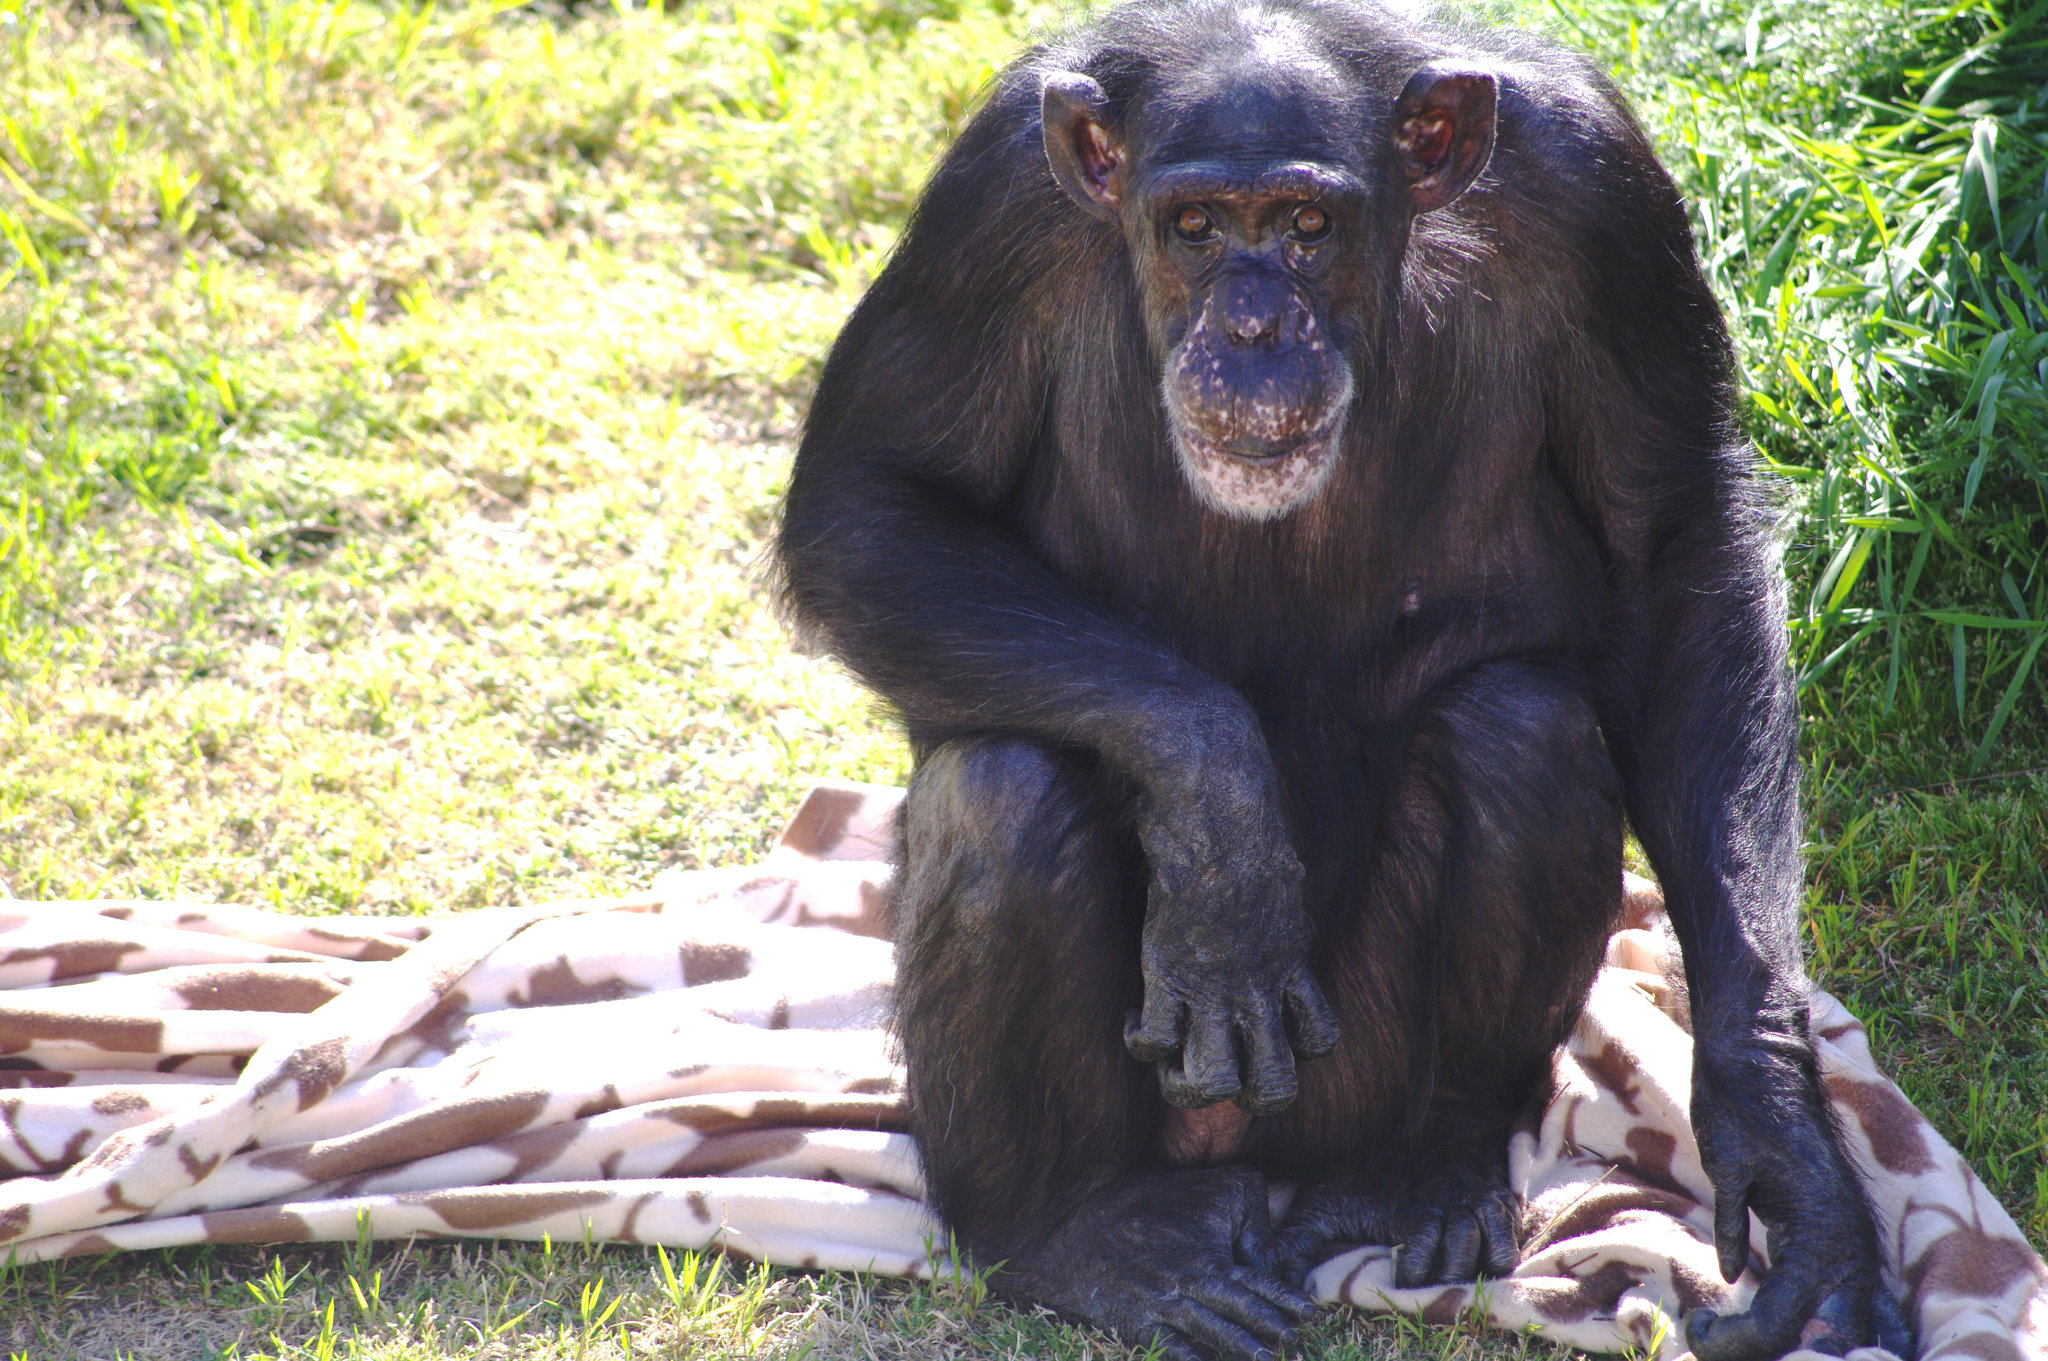 Who was the most famous chimp in the world?